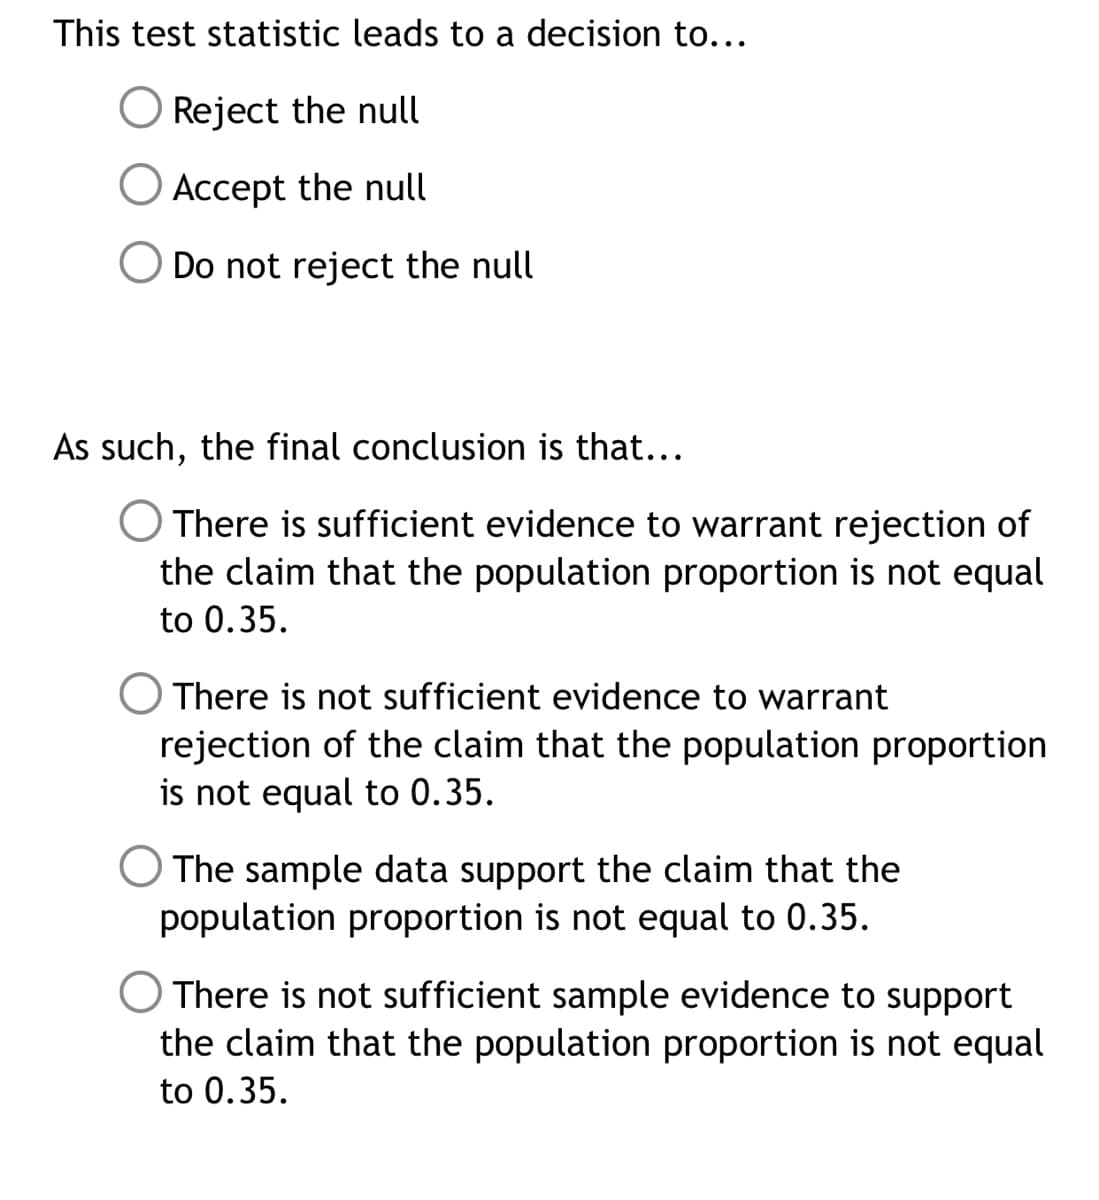 This test statistic leads to a decision to...
O Reject the null
Accept the null
O Do not reject the null
As such, the final conclusion is that...
There is sufficient evidence to warrant rejection of
the claim that the population proportion is not equal
to 0.35.
There is not sufficient evidence to warrant
rejection of the claim that the population proportion
is not equal to 0.35.
O The sample data support the claim that the
population proportion is not equal to 0.35.
There is not sufficient sample evidence to support
the claim that the population proportion is not equal
to 0.35.
